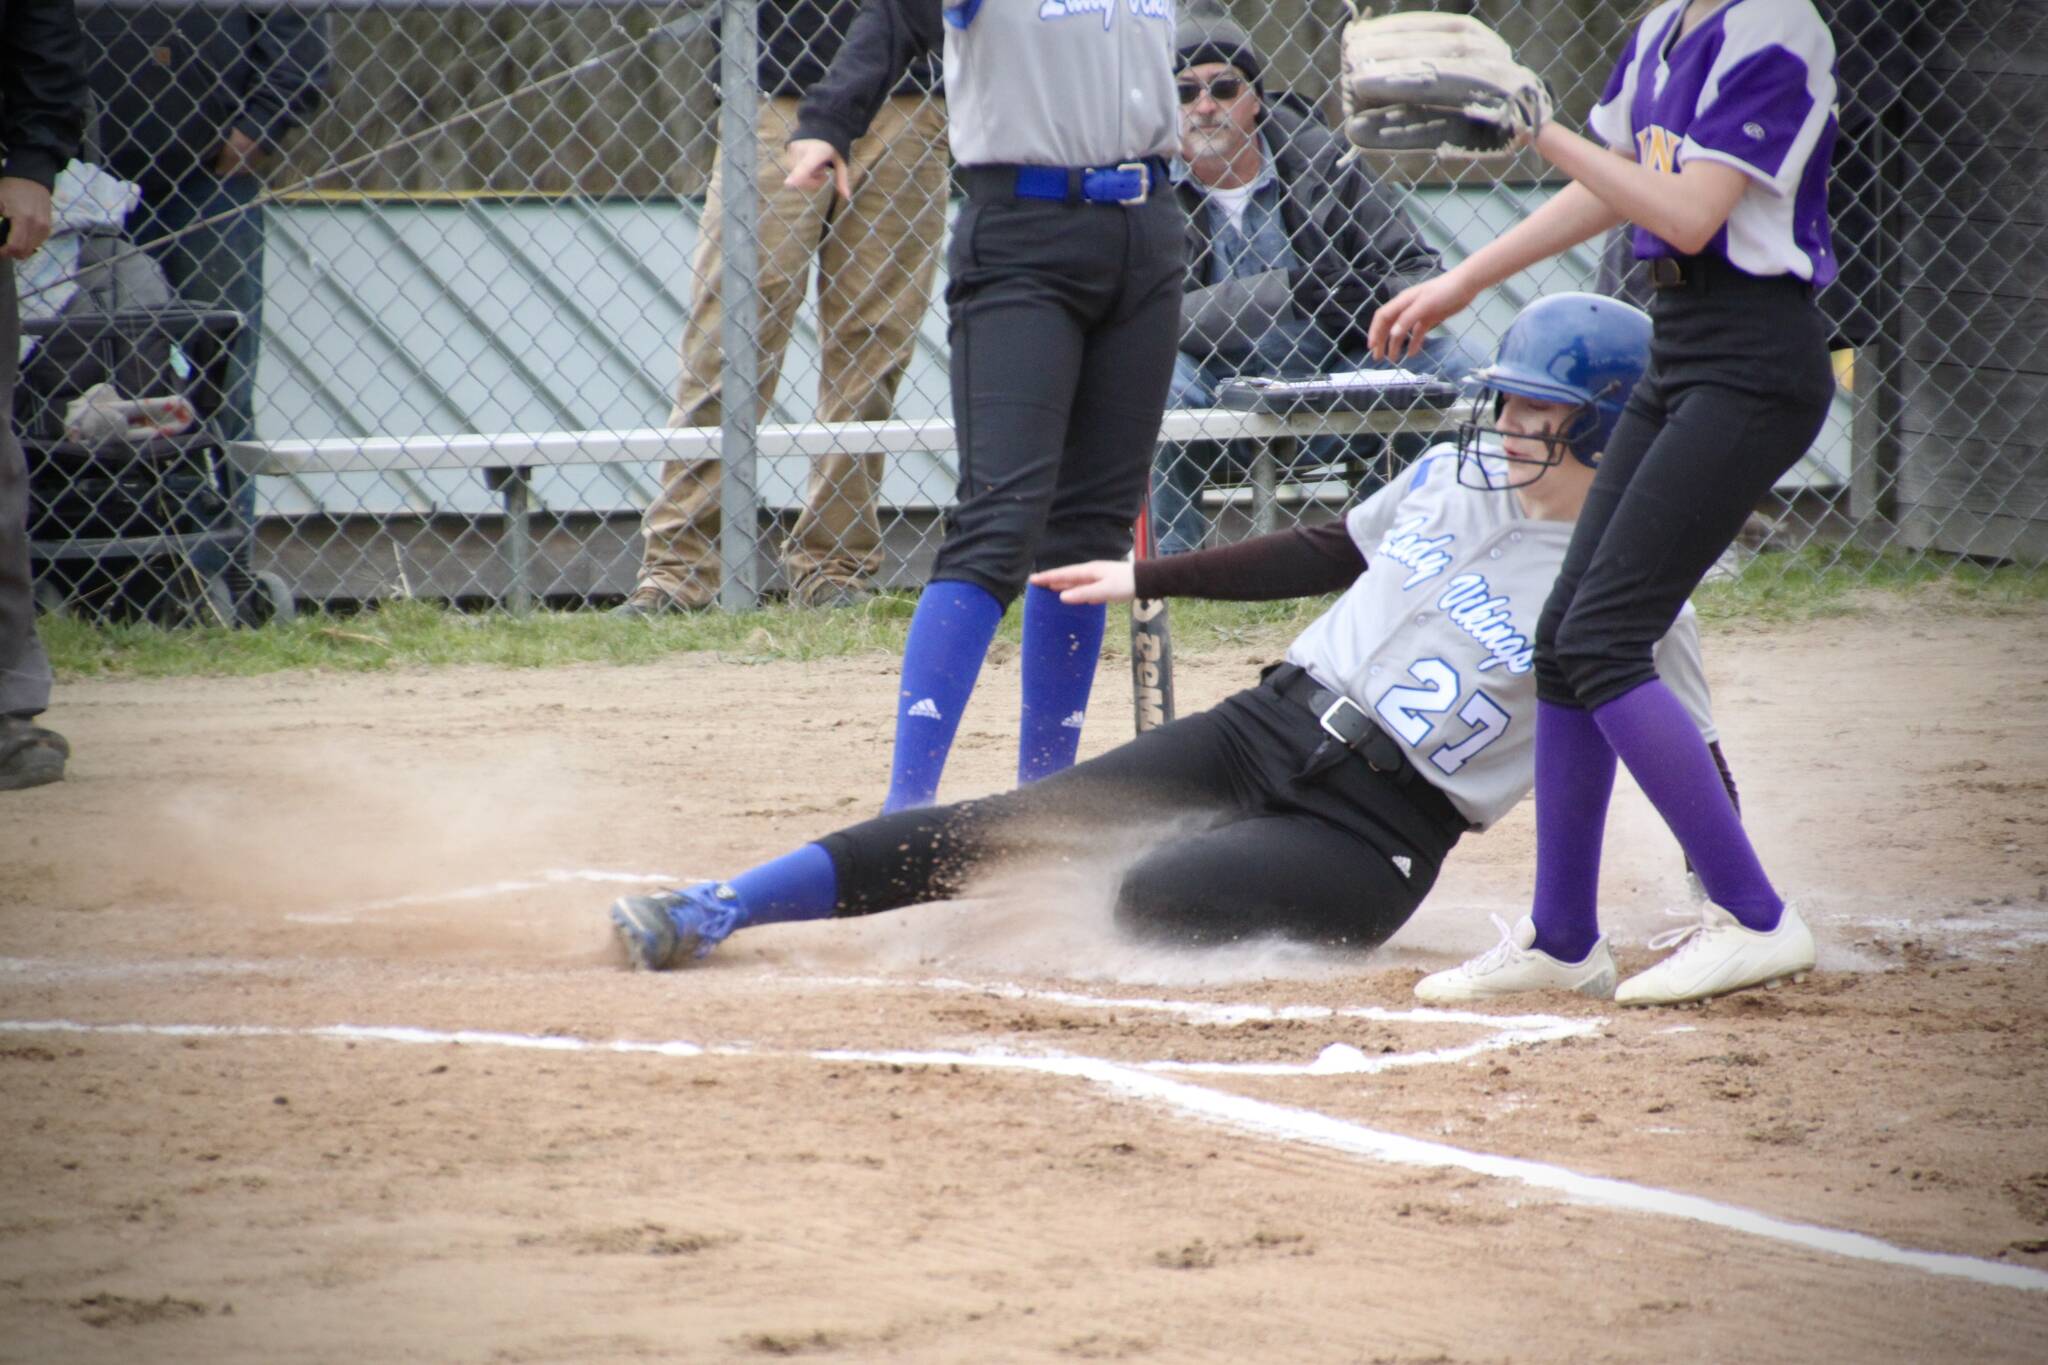 Corey Wiscomb photo.
Hannah Alexander in the midst of a dramatic slide into home plate against the Concrete Lions.